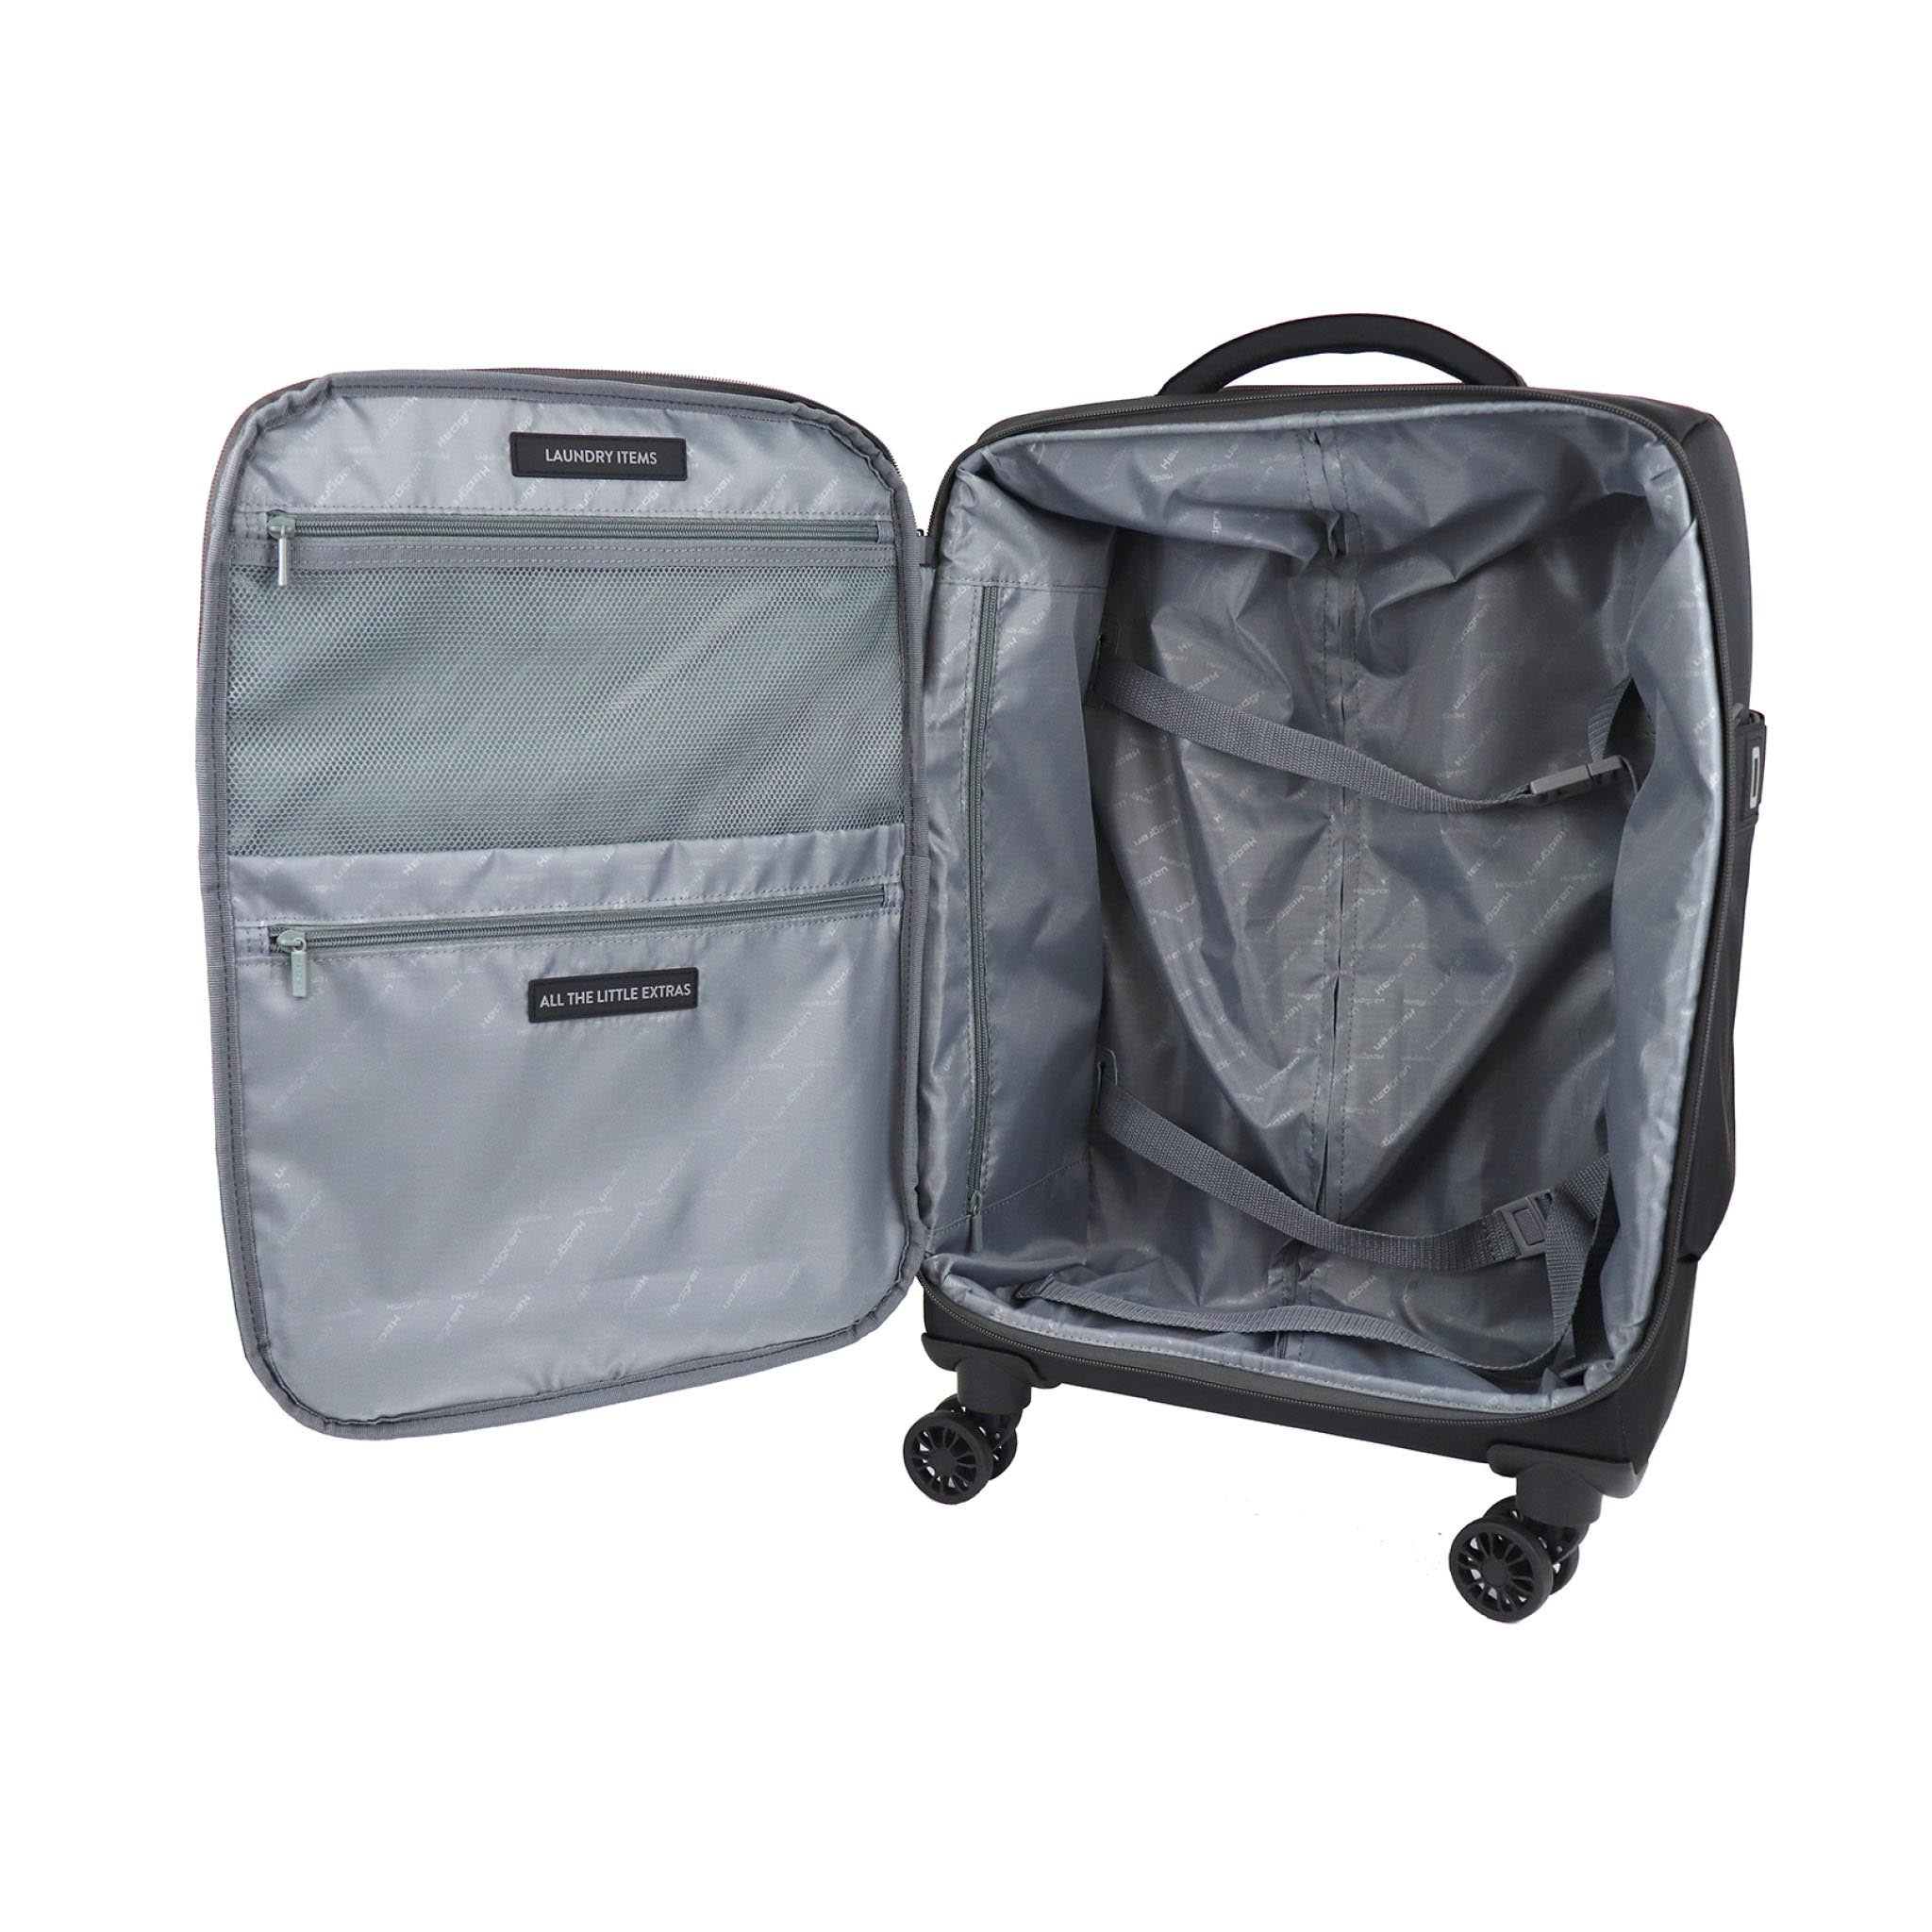 Hedgren Constellation 20" Sustainable Soft Sided Carry On